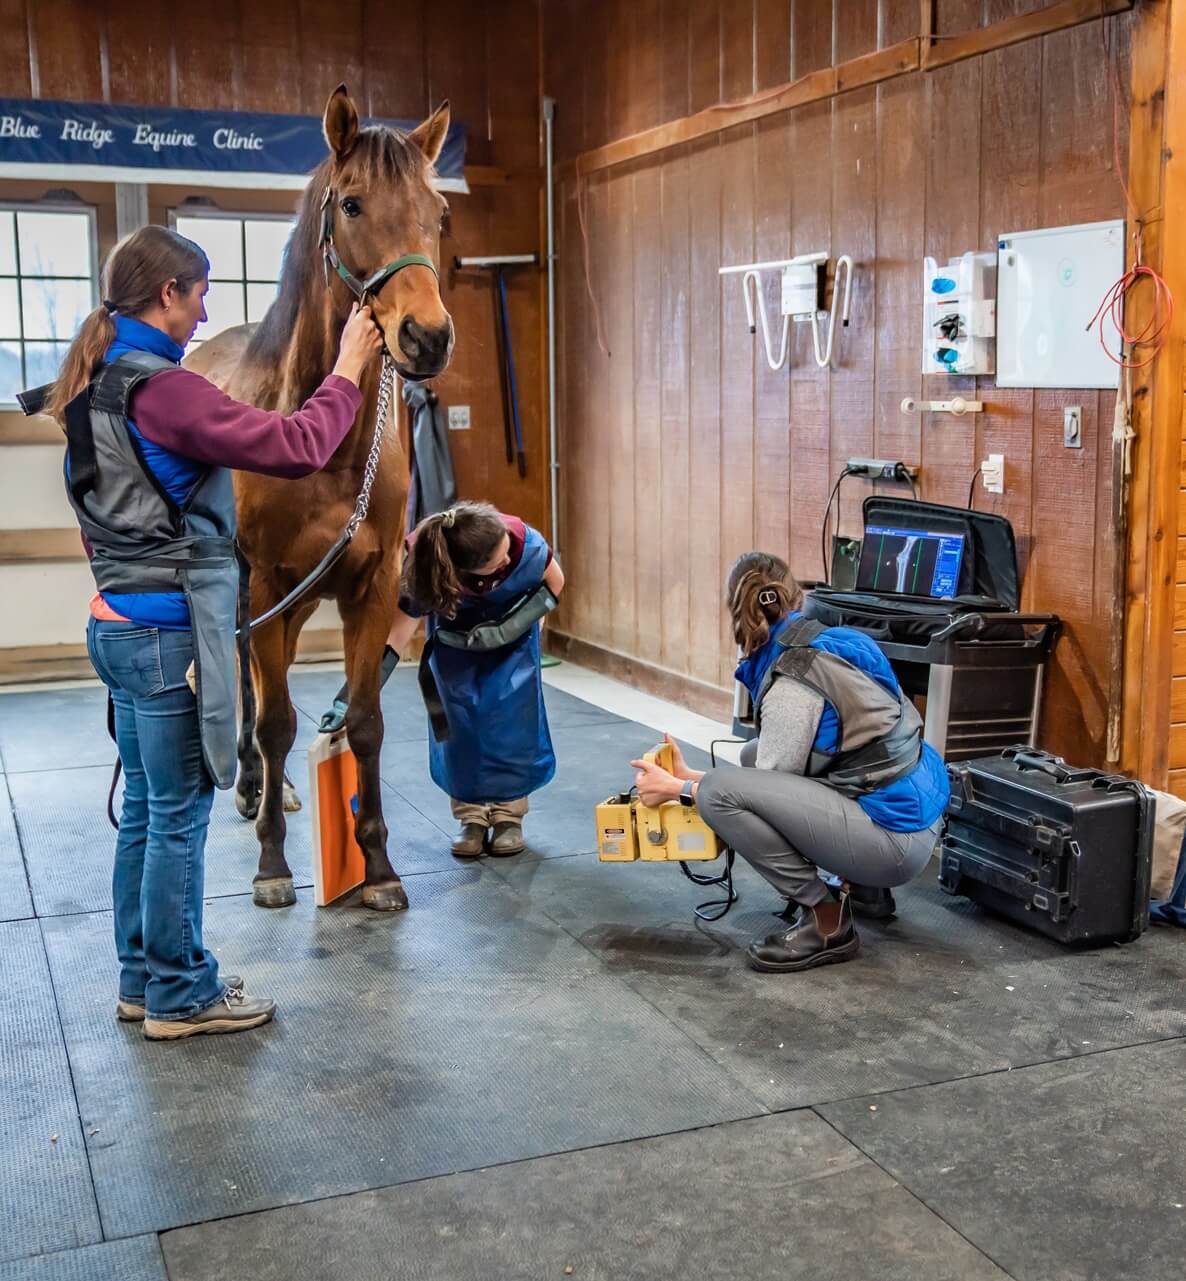 Vets performing an x-ray on equine.